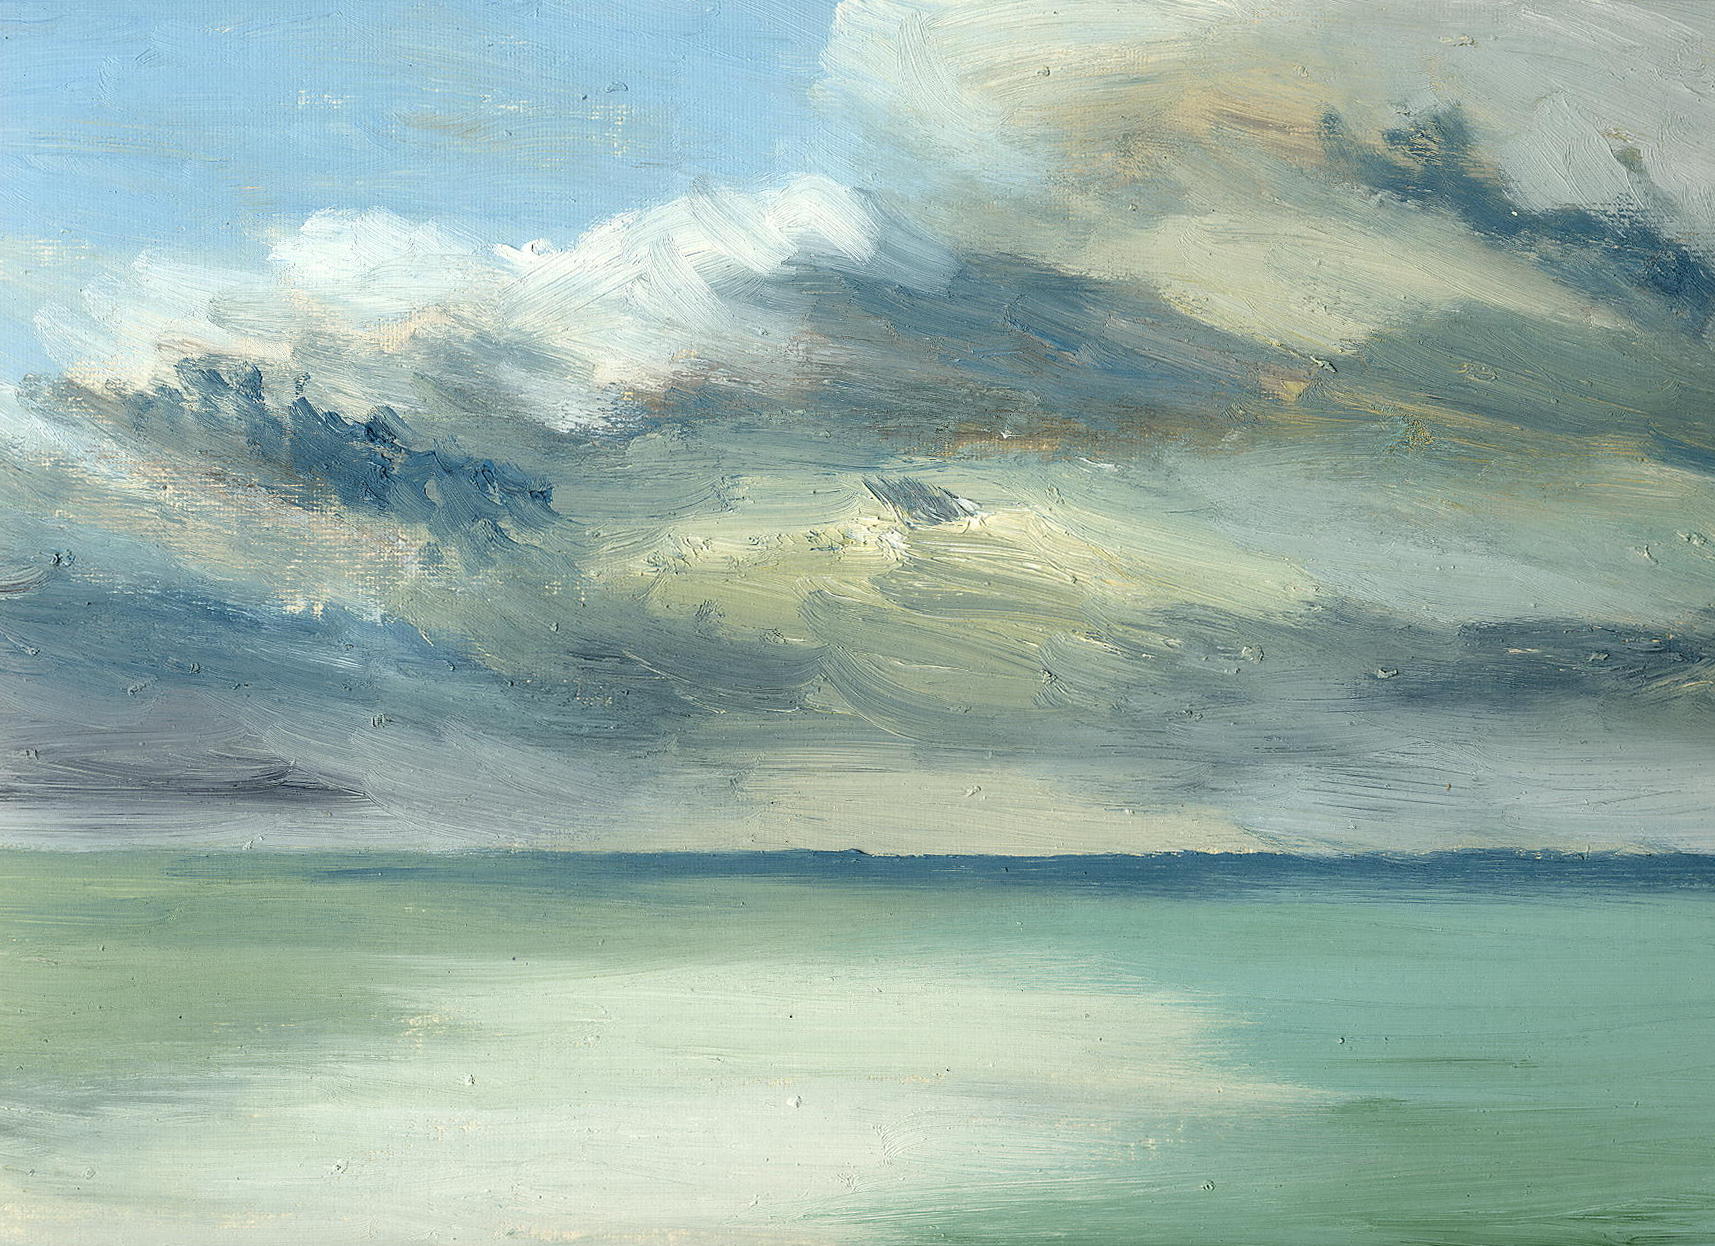 Cornish sea and sky scape paintings